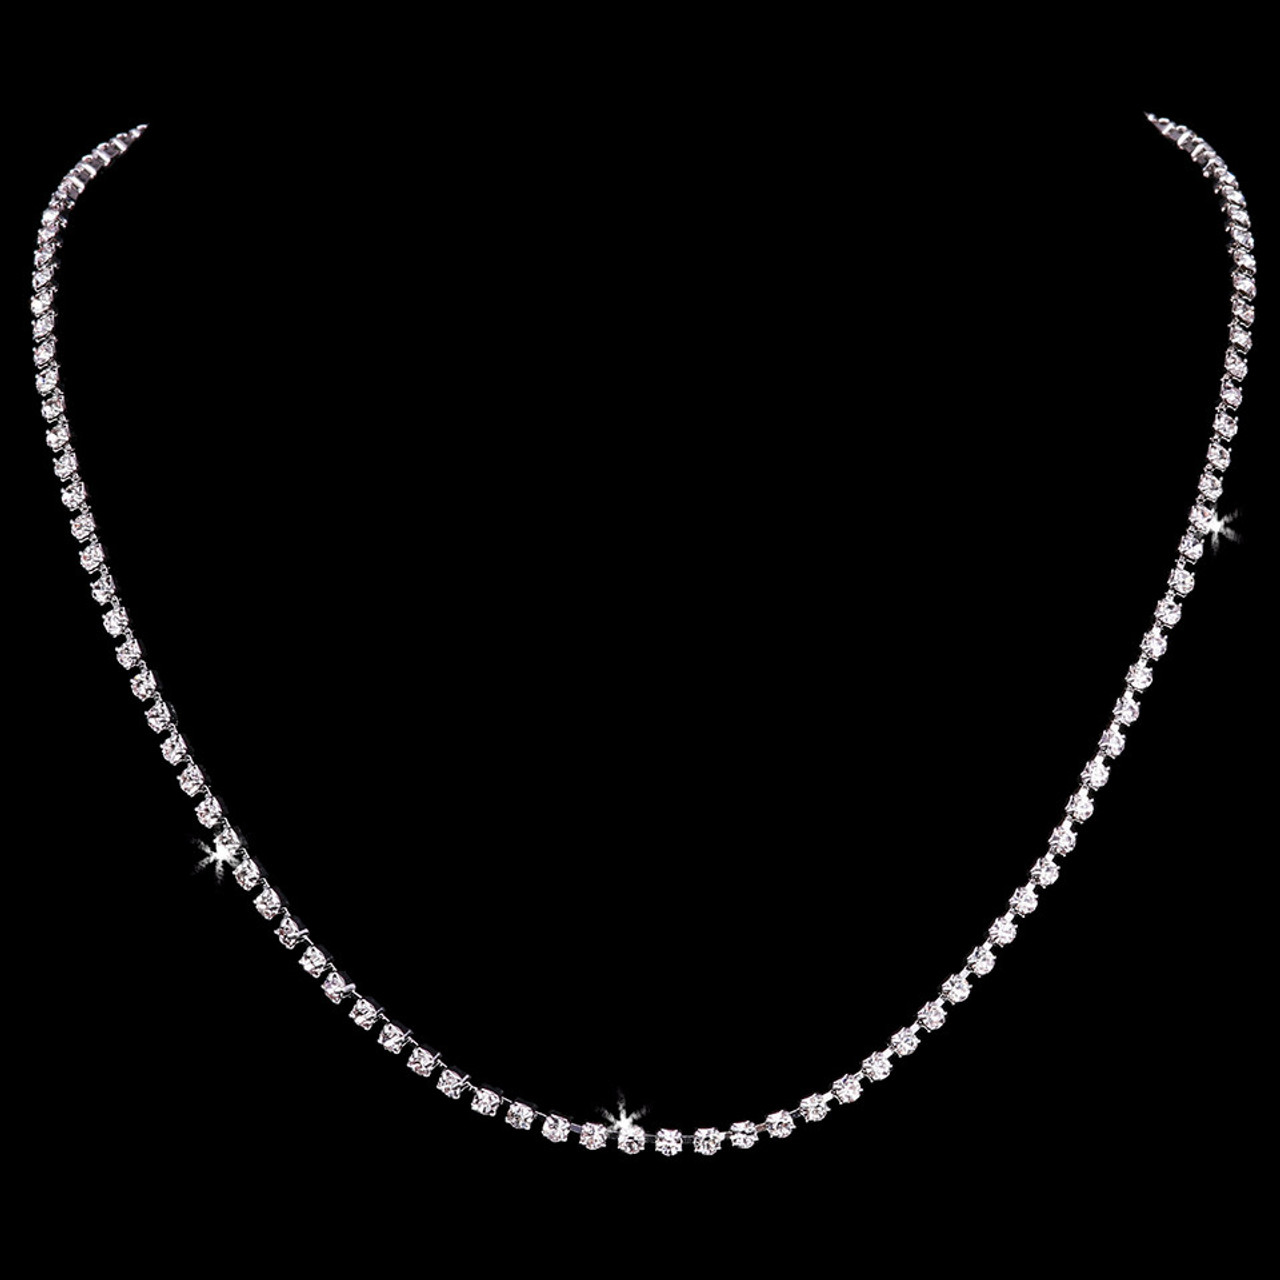 En Vogue Bridal Necklace and Earring Set Style NL2250 - Rhodium Plated Necklace